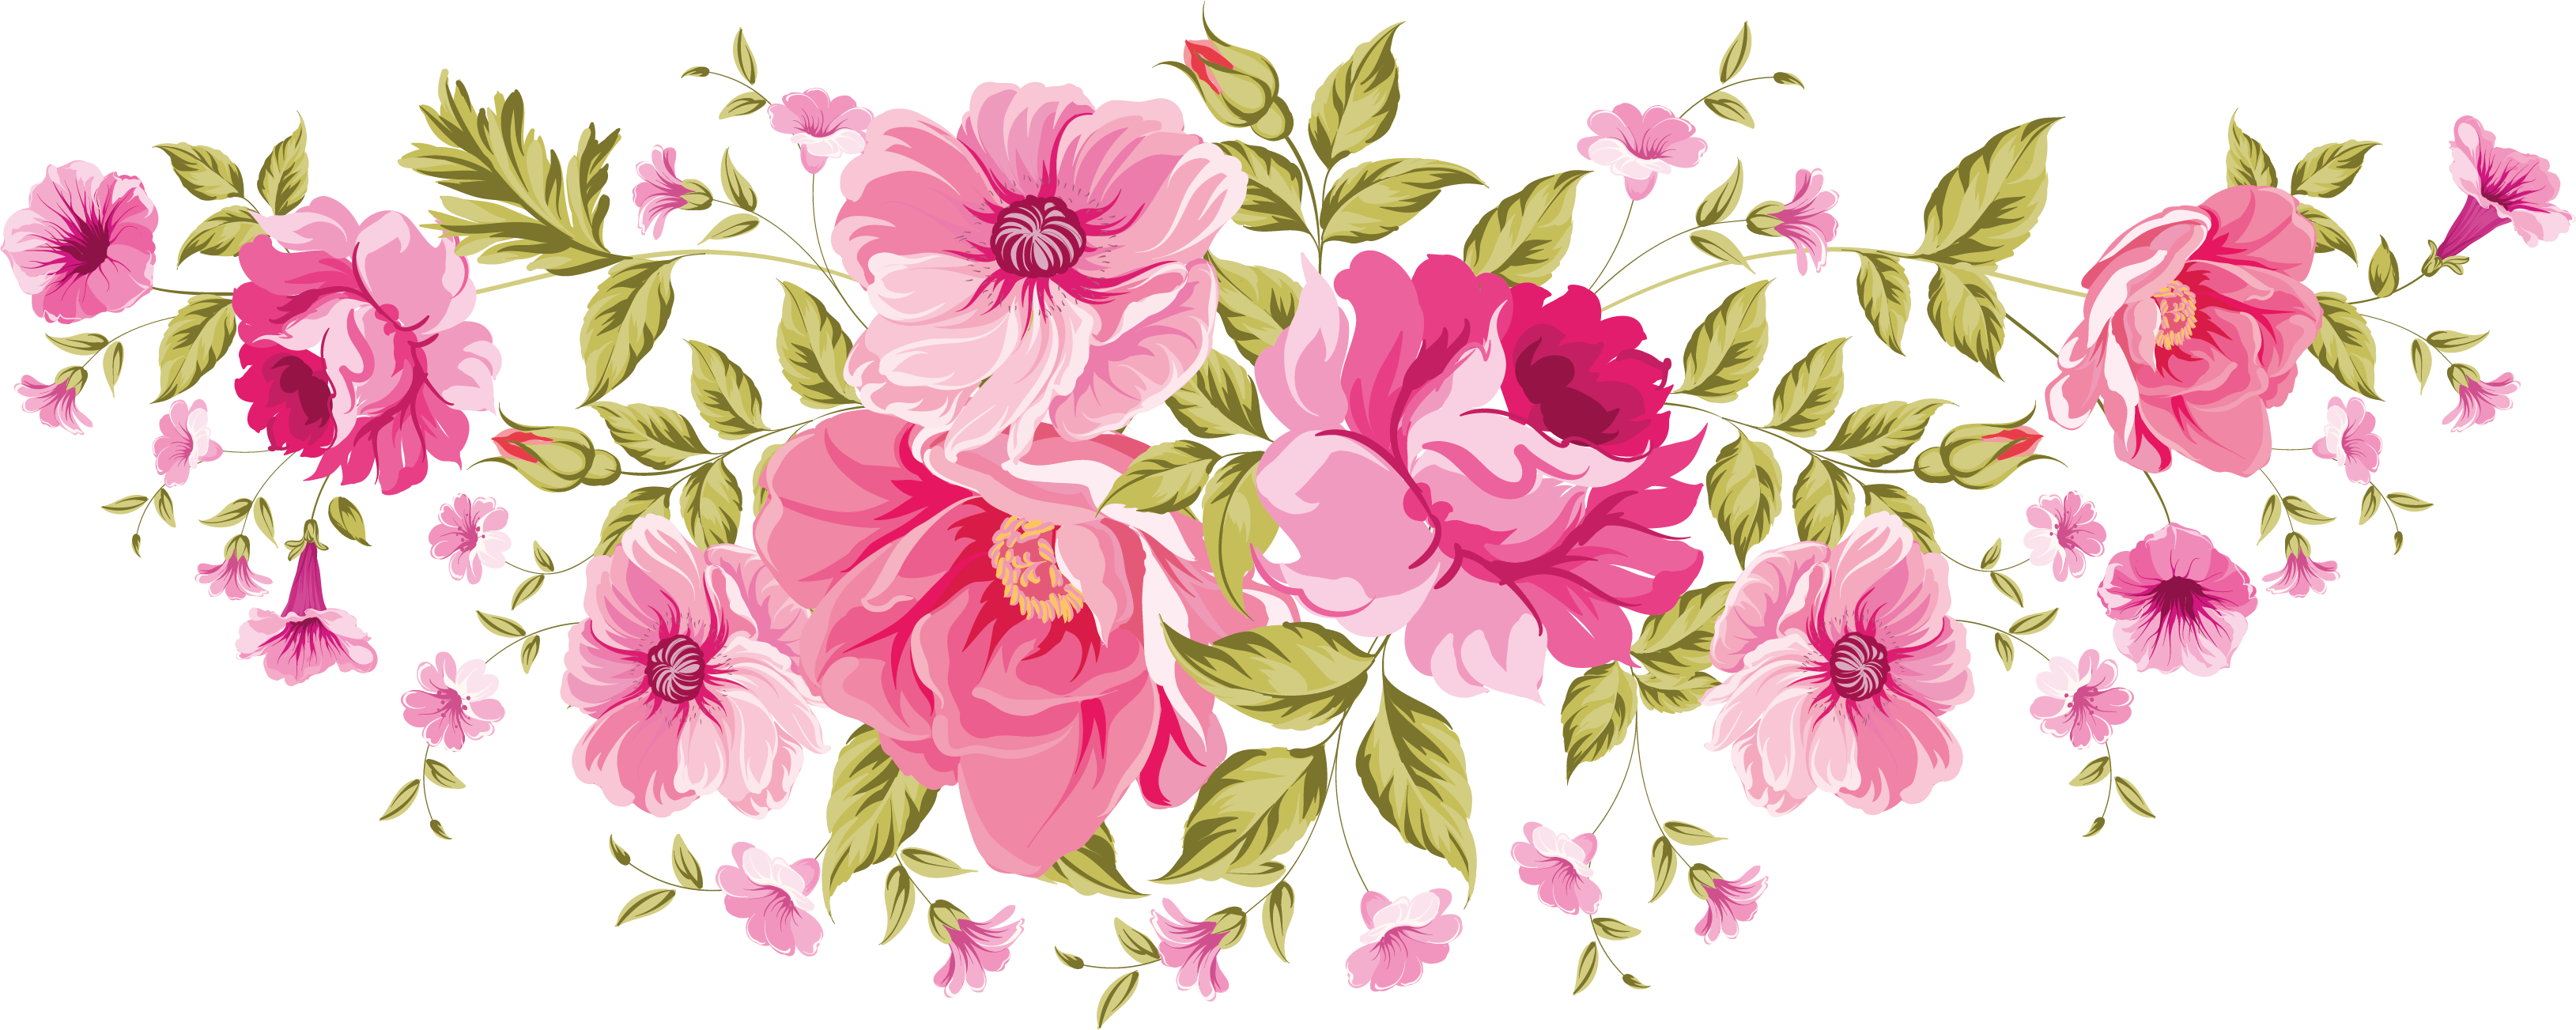 Colored Floral PNG Image Background | PNG Arts